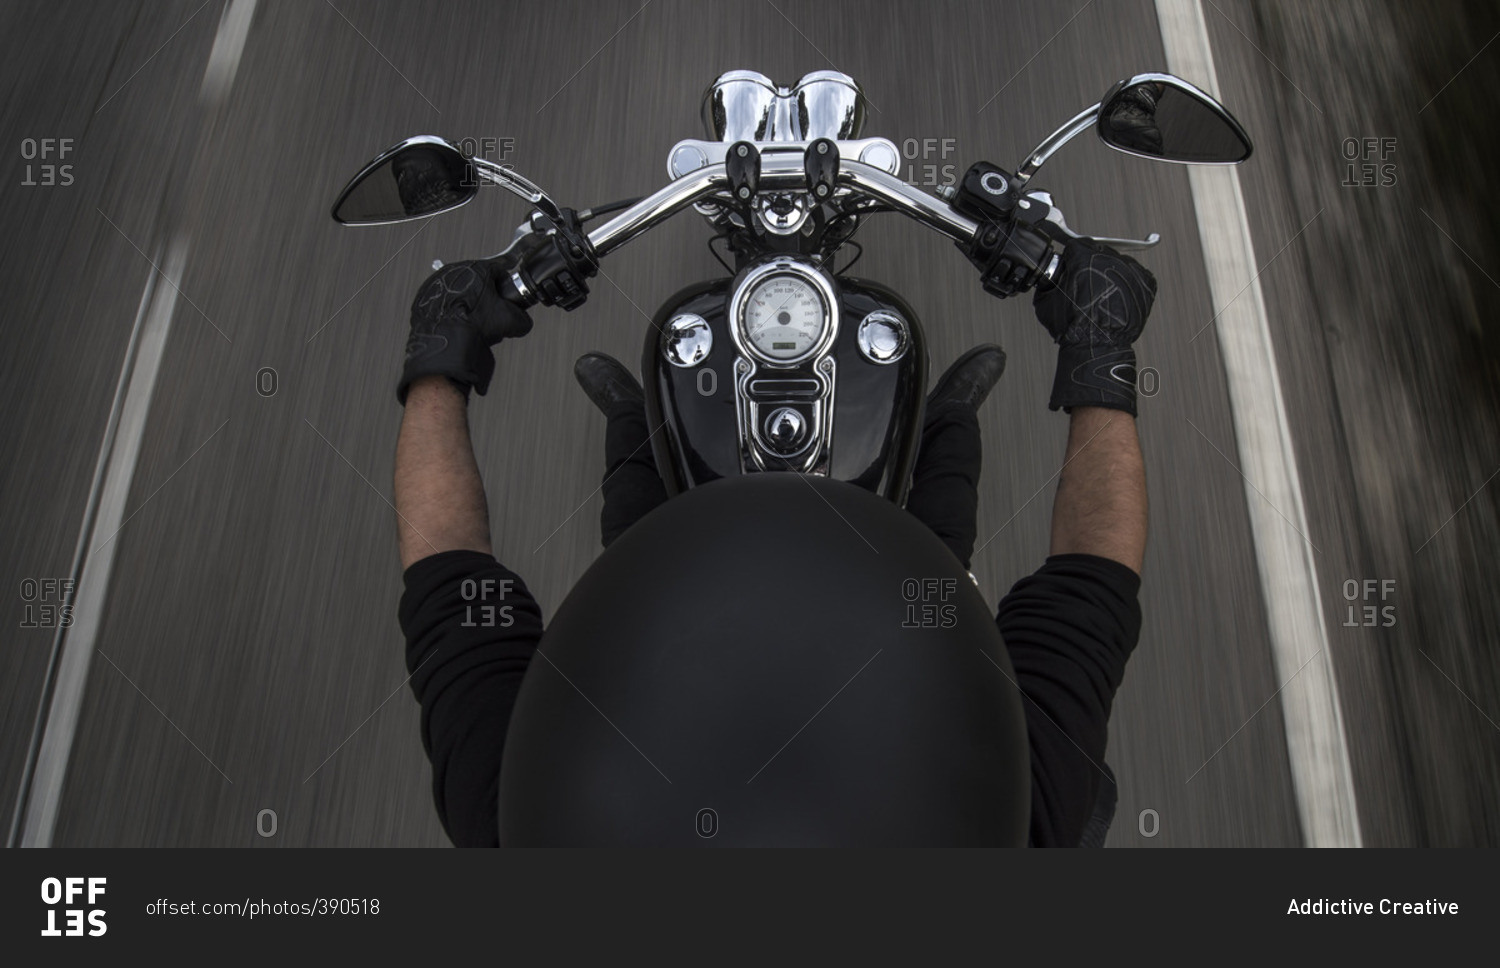 Top View Of Man Riding Motorcycle Stock Photo Offset